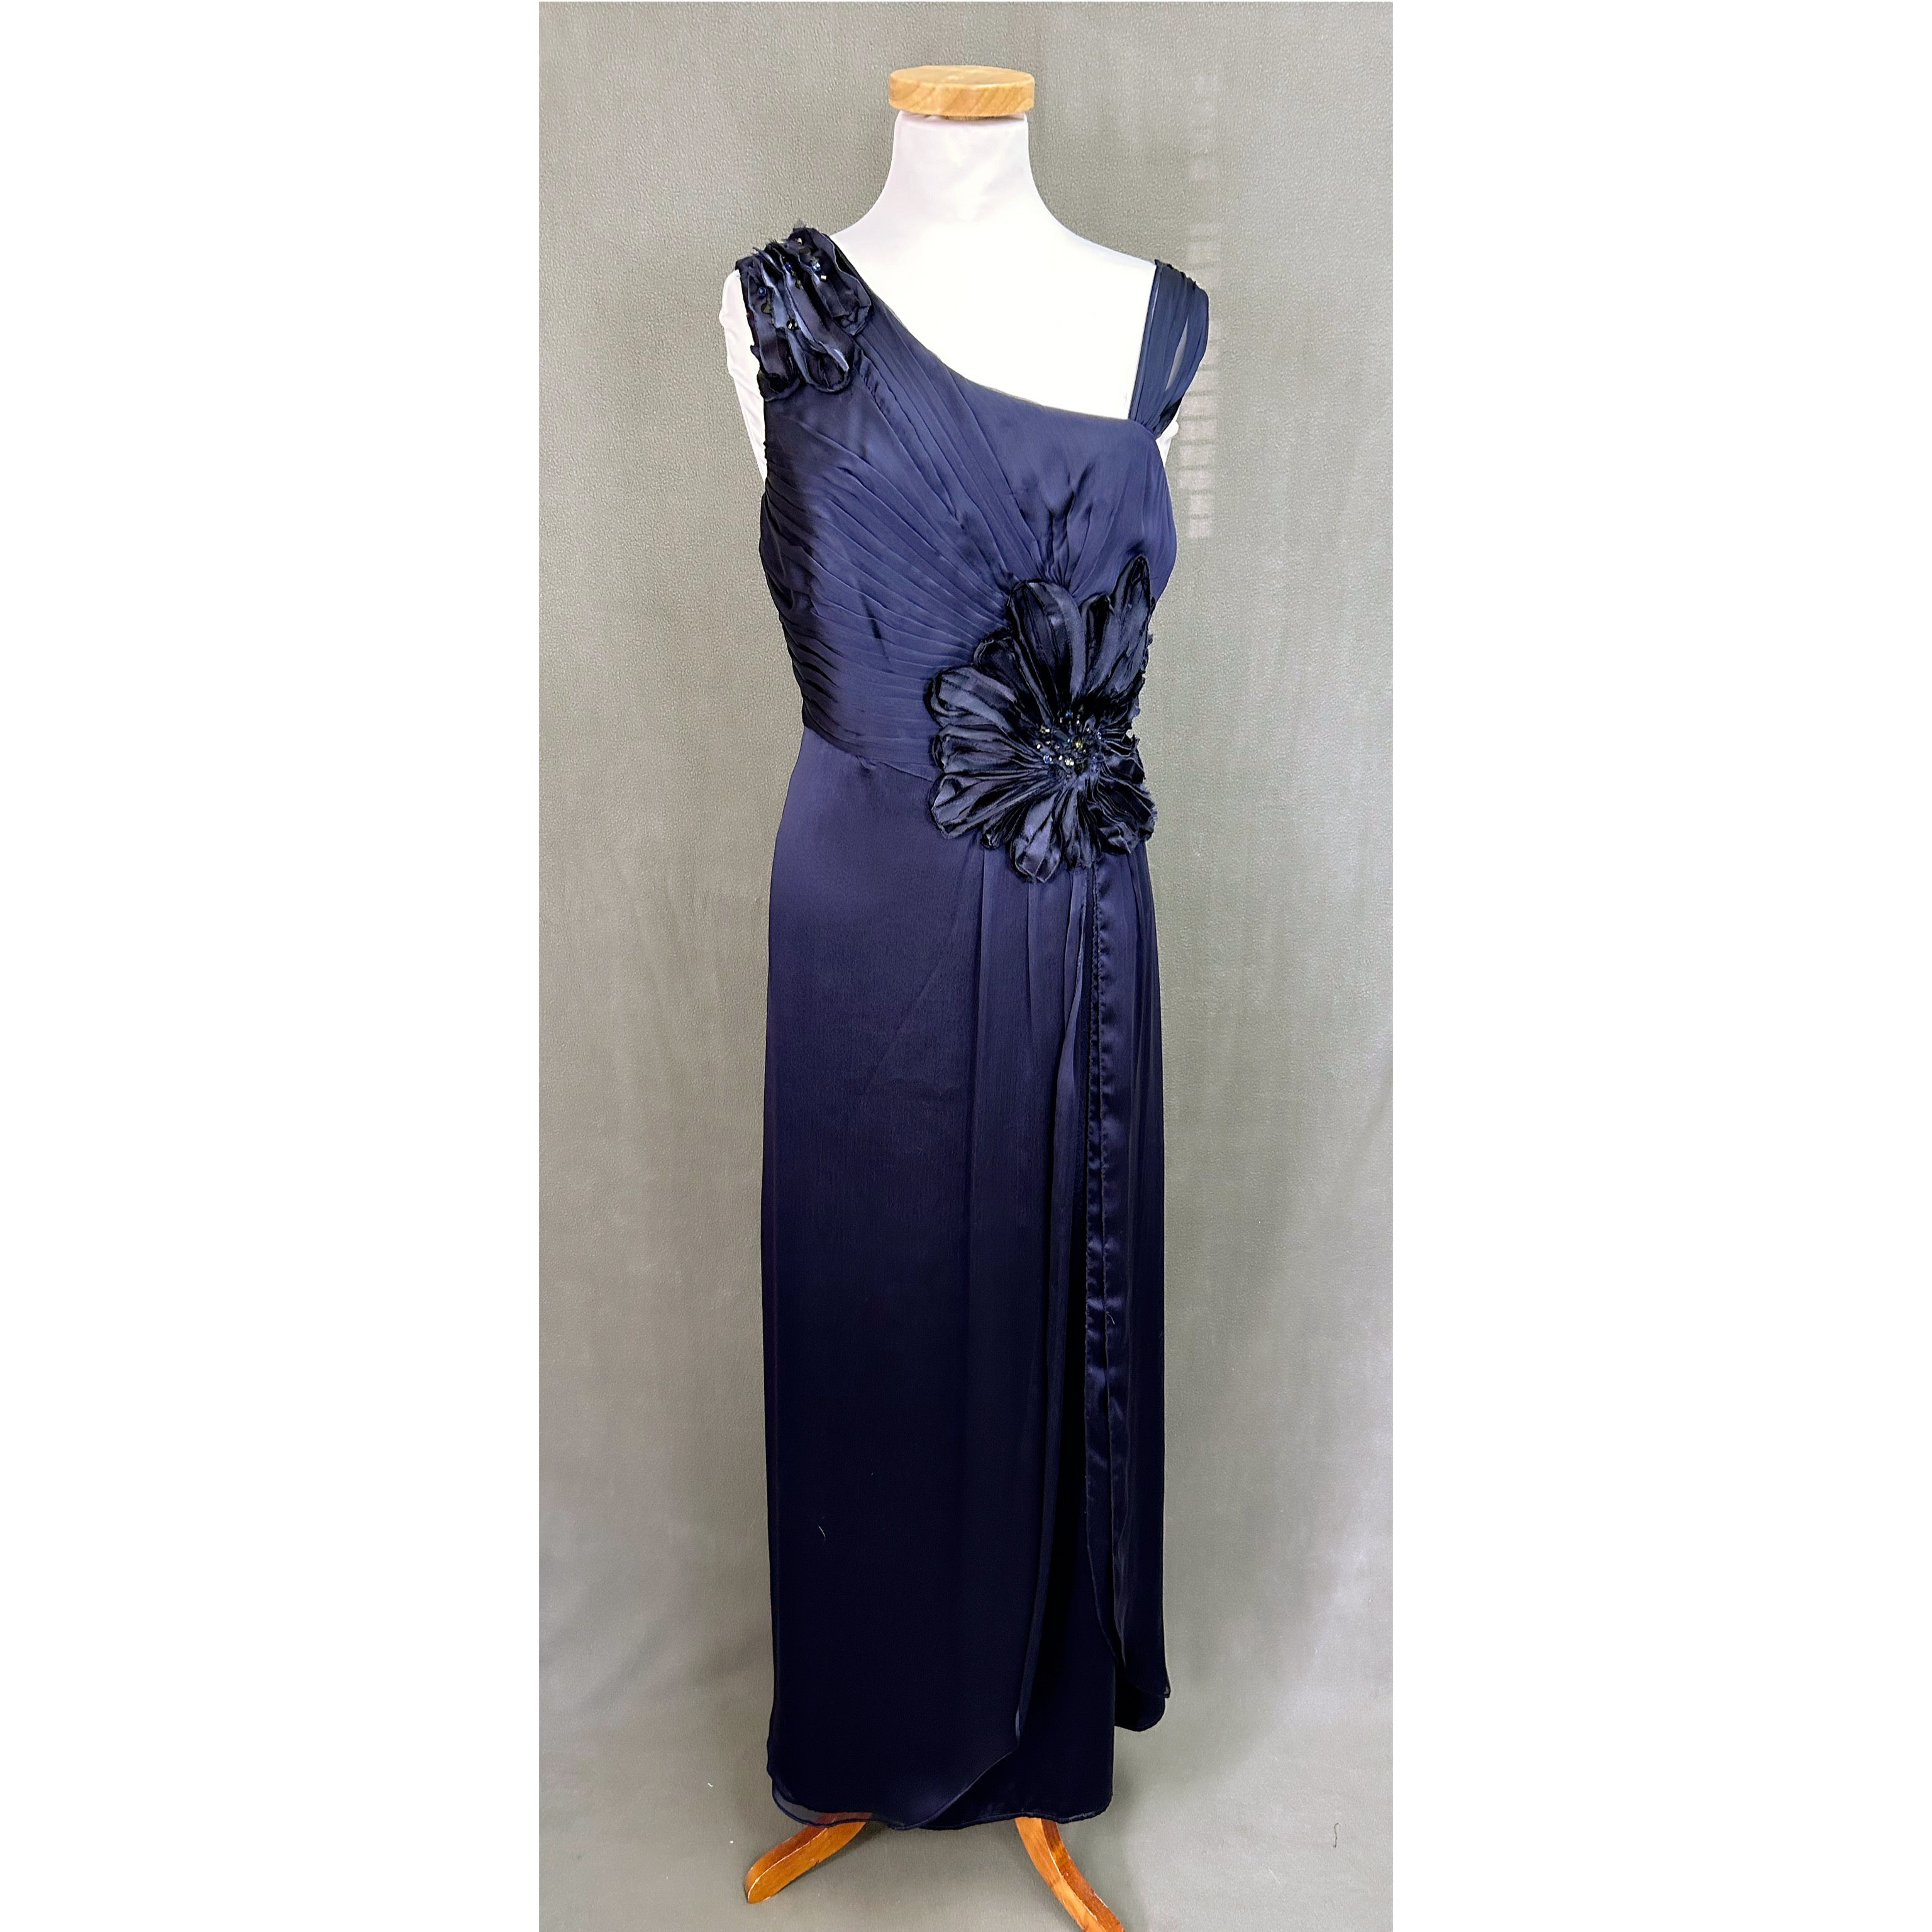 KM Collections navy dress, size 10, NEW WITH TAGS!